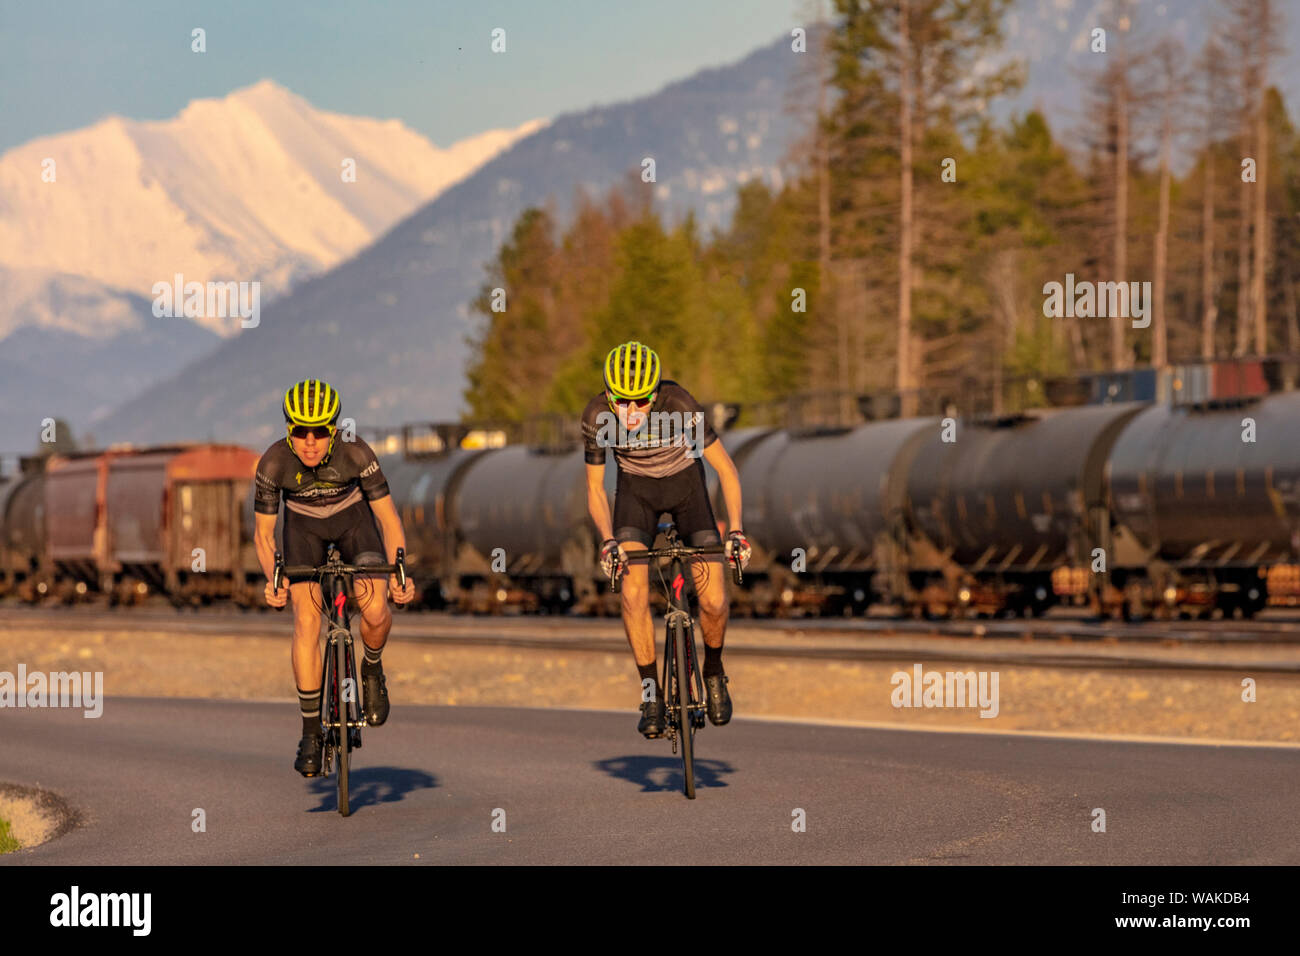 Teenagers road bicycling on Edgewood Road with Great Northern Mountain and railyard in the background in Whitefish, Montana, USA (MR) Stock Photo